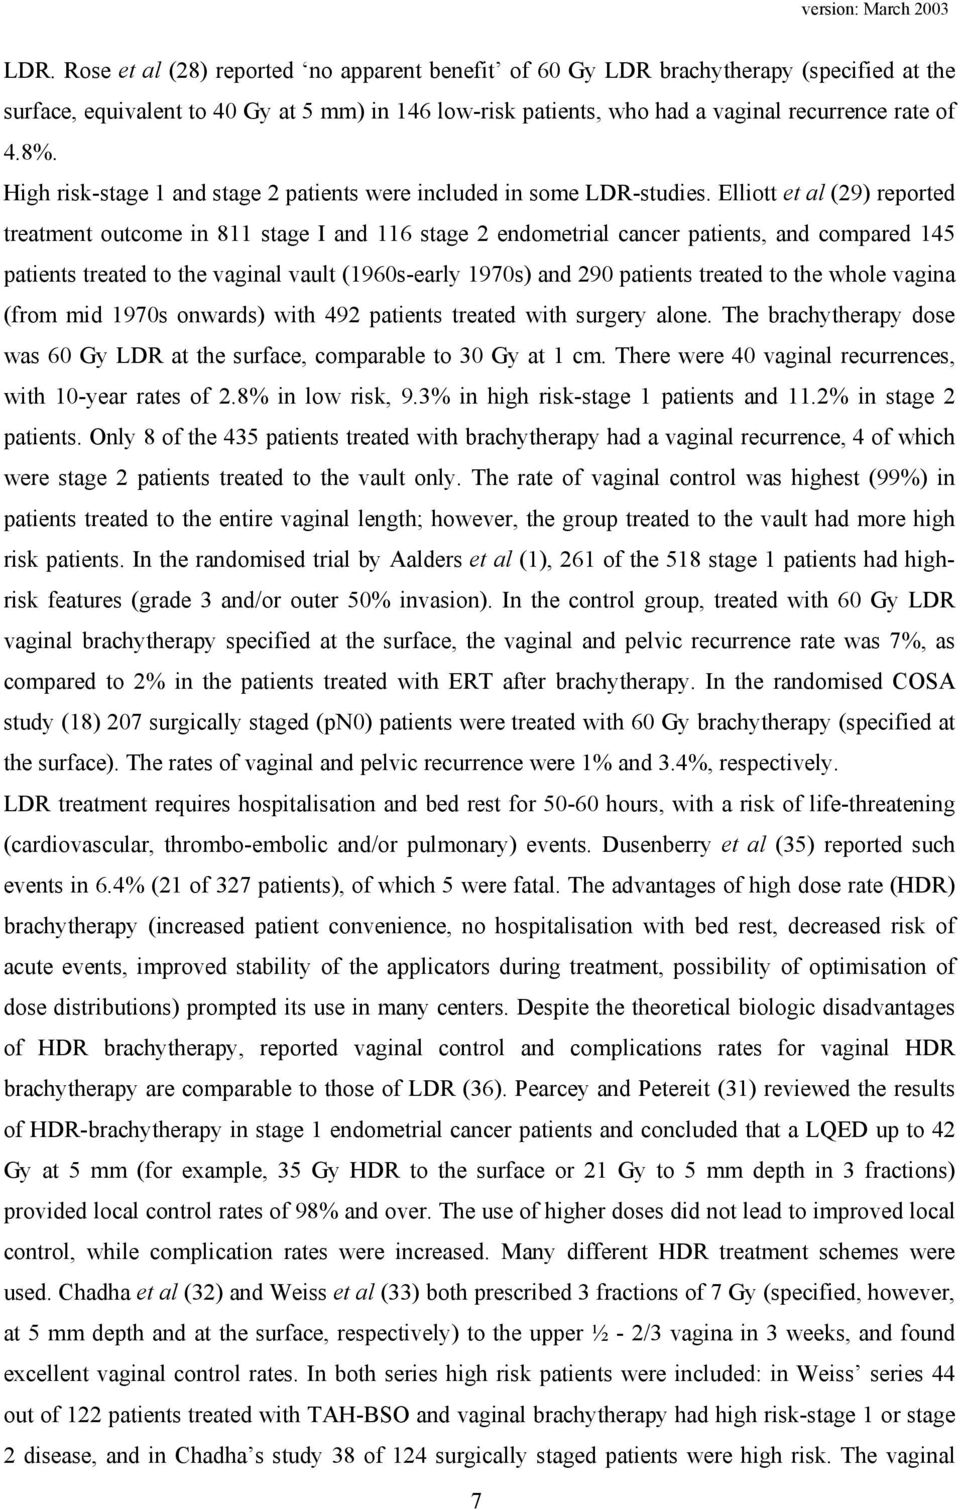 Elliott et al (29) reported treatment outcome in 811 stage I and 116 stage 2 endometrial cancer patients, and compared 145 patients treated to the vaginal vault (1960s-early 1970s) and 290 patients